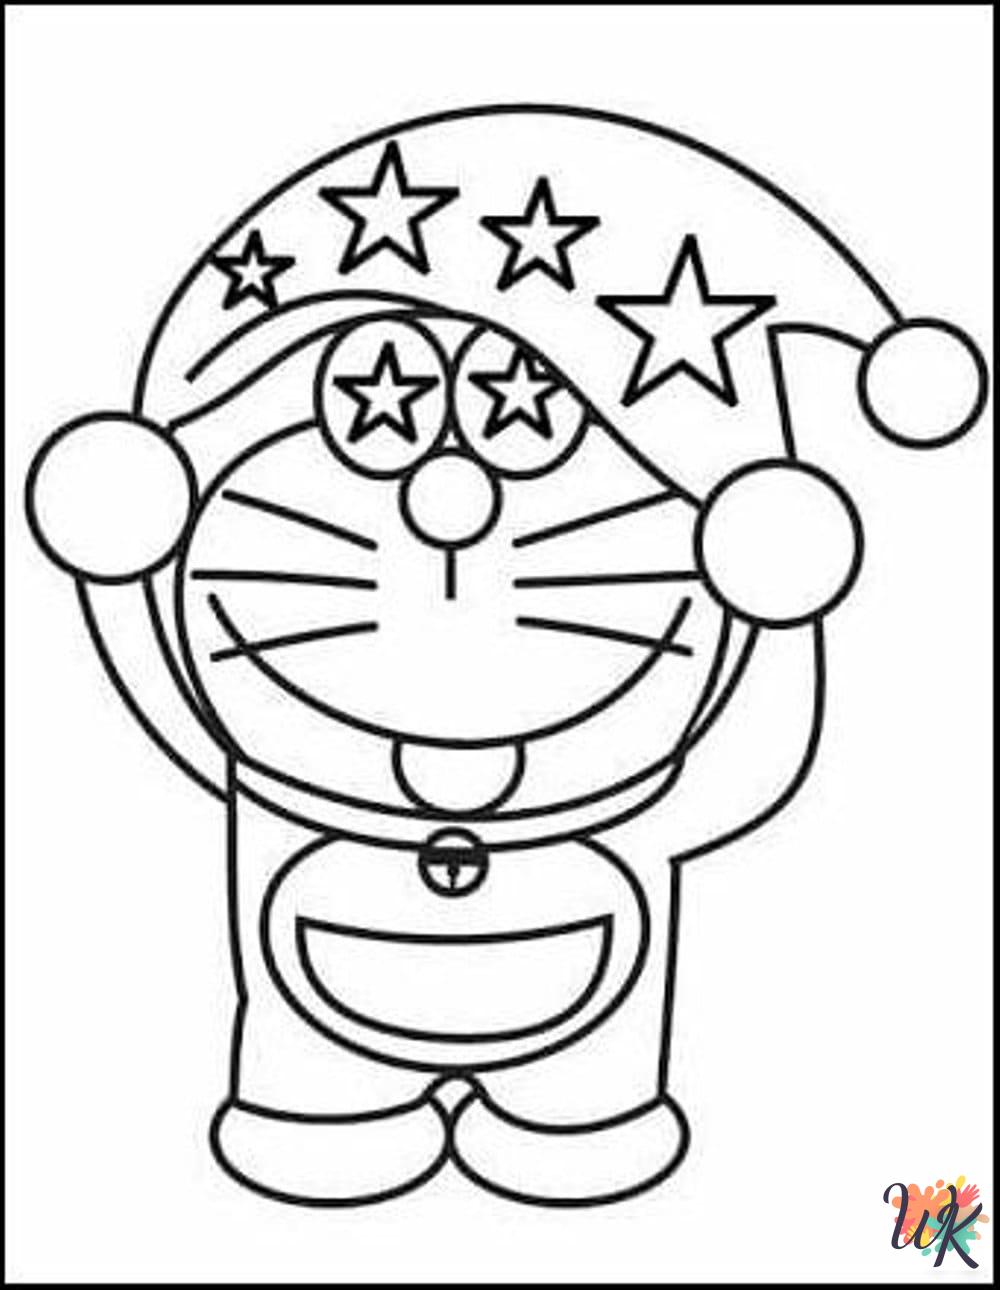 old-fashioned Doraemon coloring pages